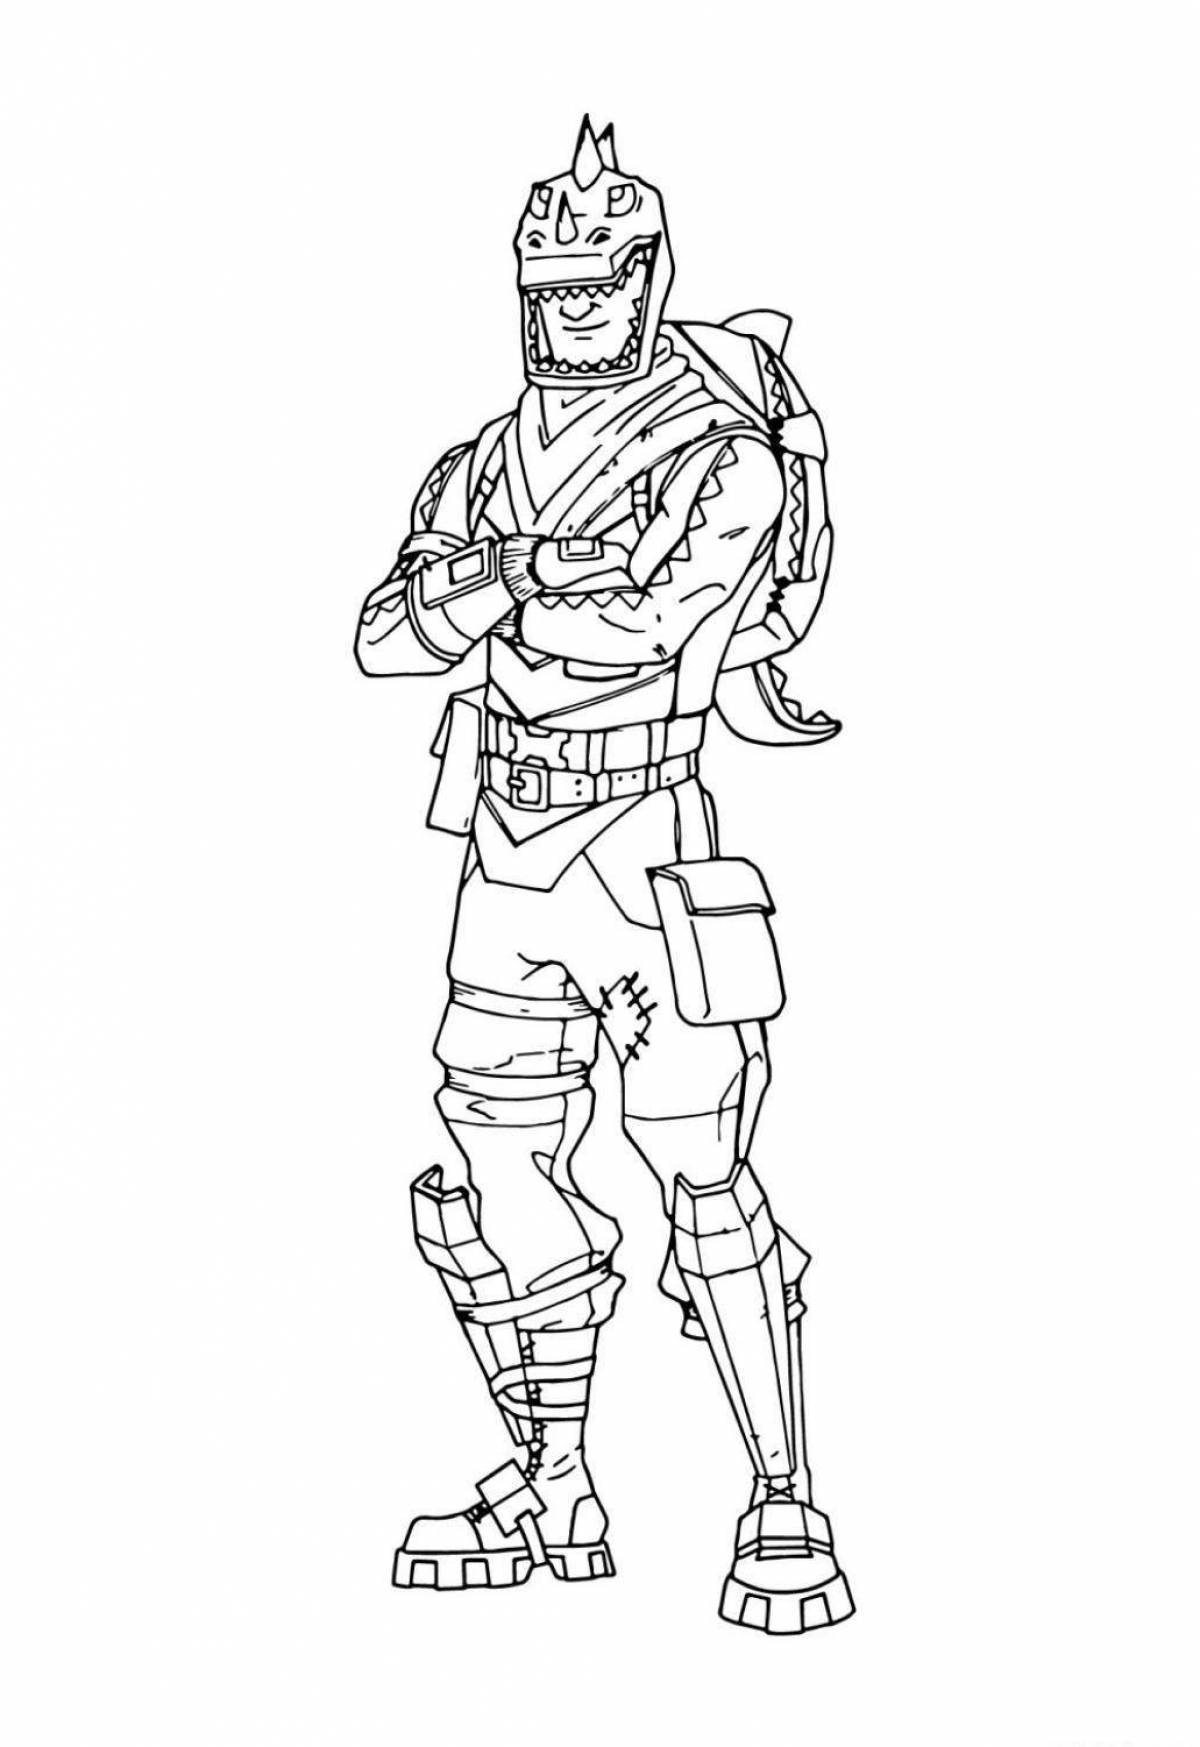 Colorful fortnite coloring page